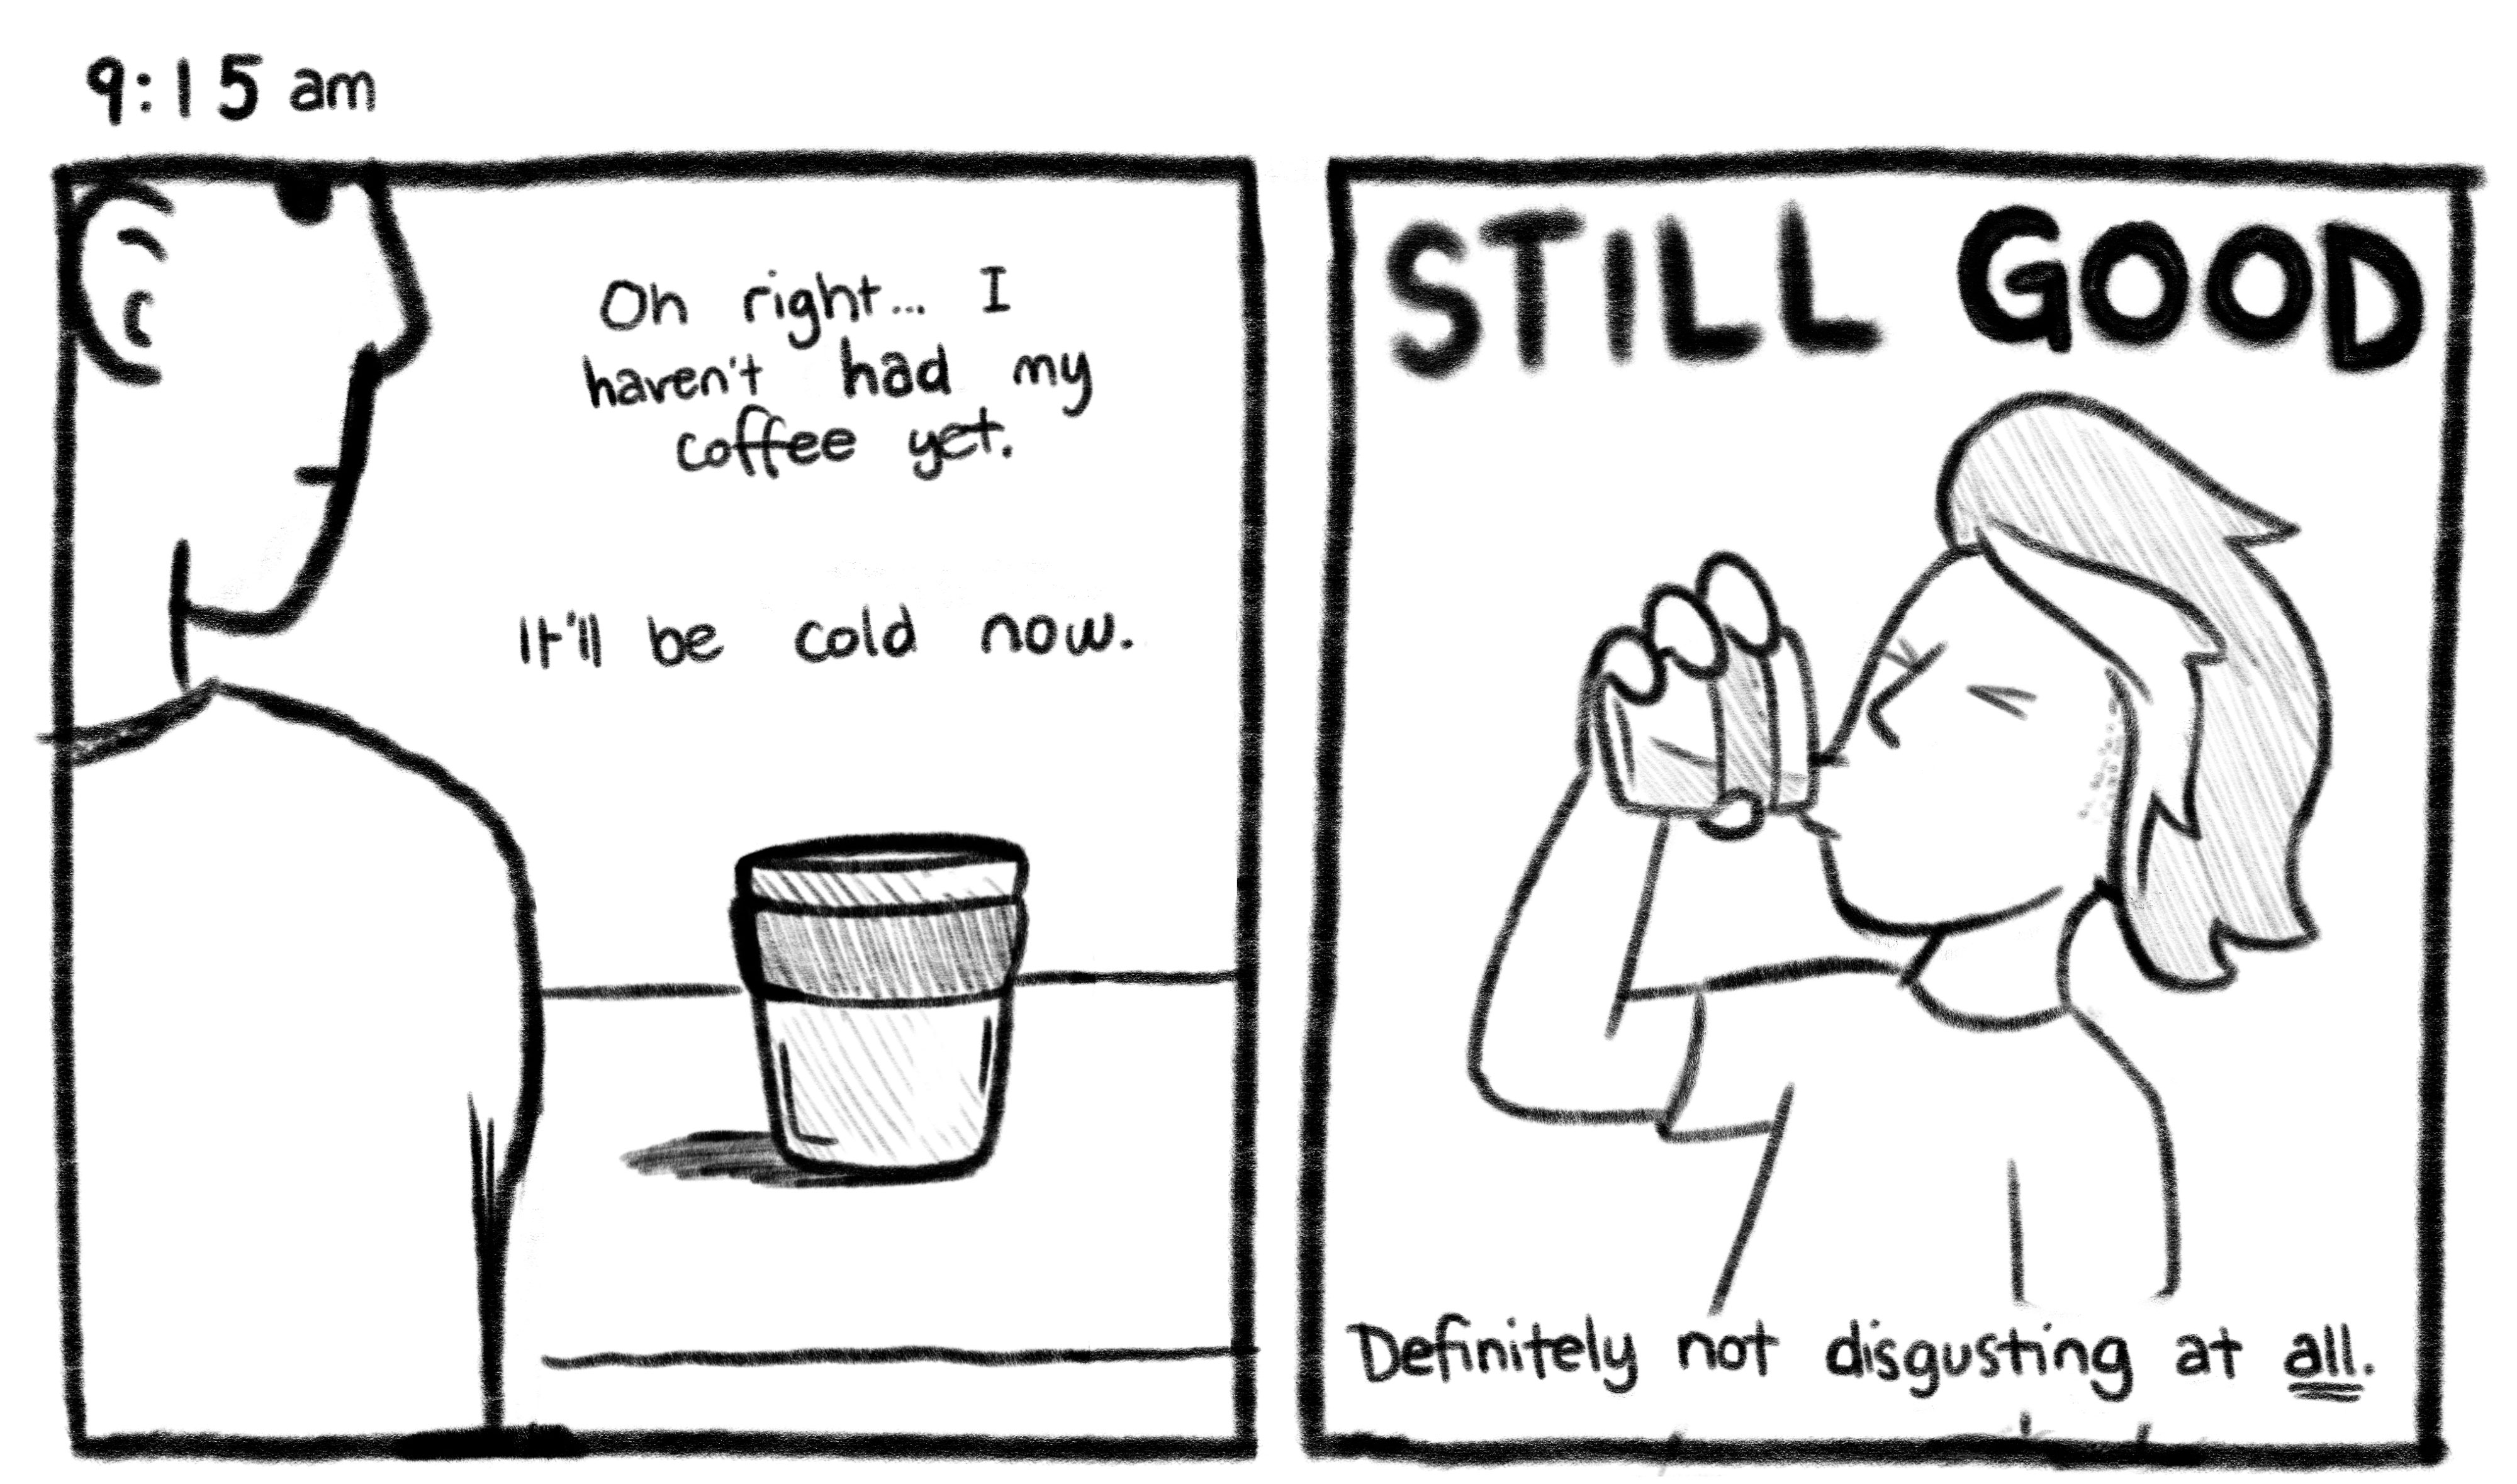 9:15am; Panel 1: Jelly looking at a cup of coffee sitting on his desk. Jelly V.O.: Oh right... I haven't had my coffee yet. It'll be cold now. Panel 1: Jelly drinking the coffee anyway. Jelly V.O.: STILL GOOD. Definitely not disgusting at all.